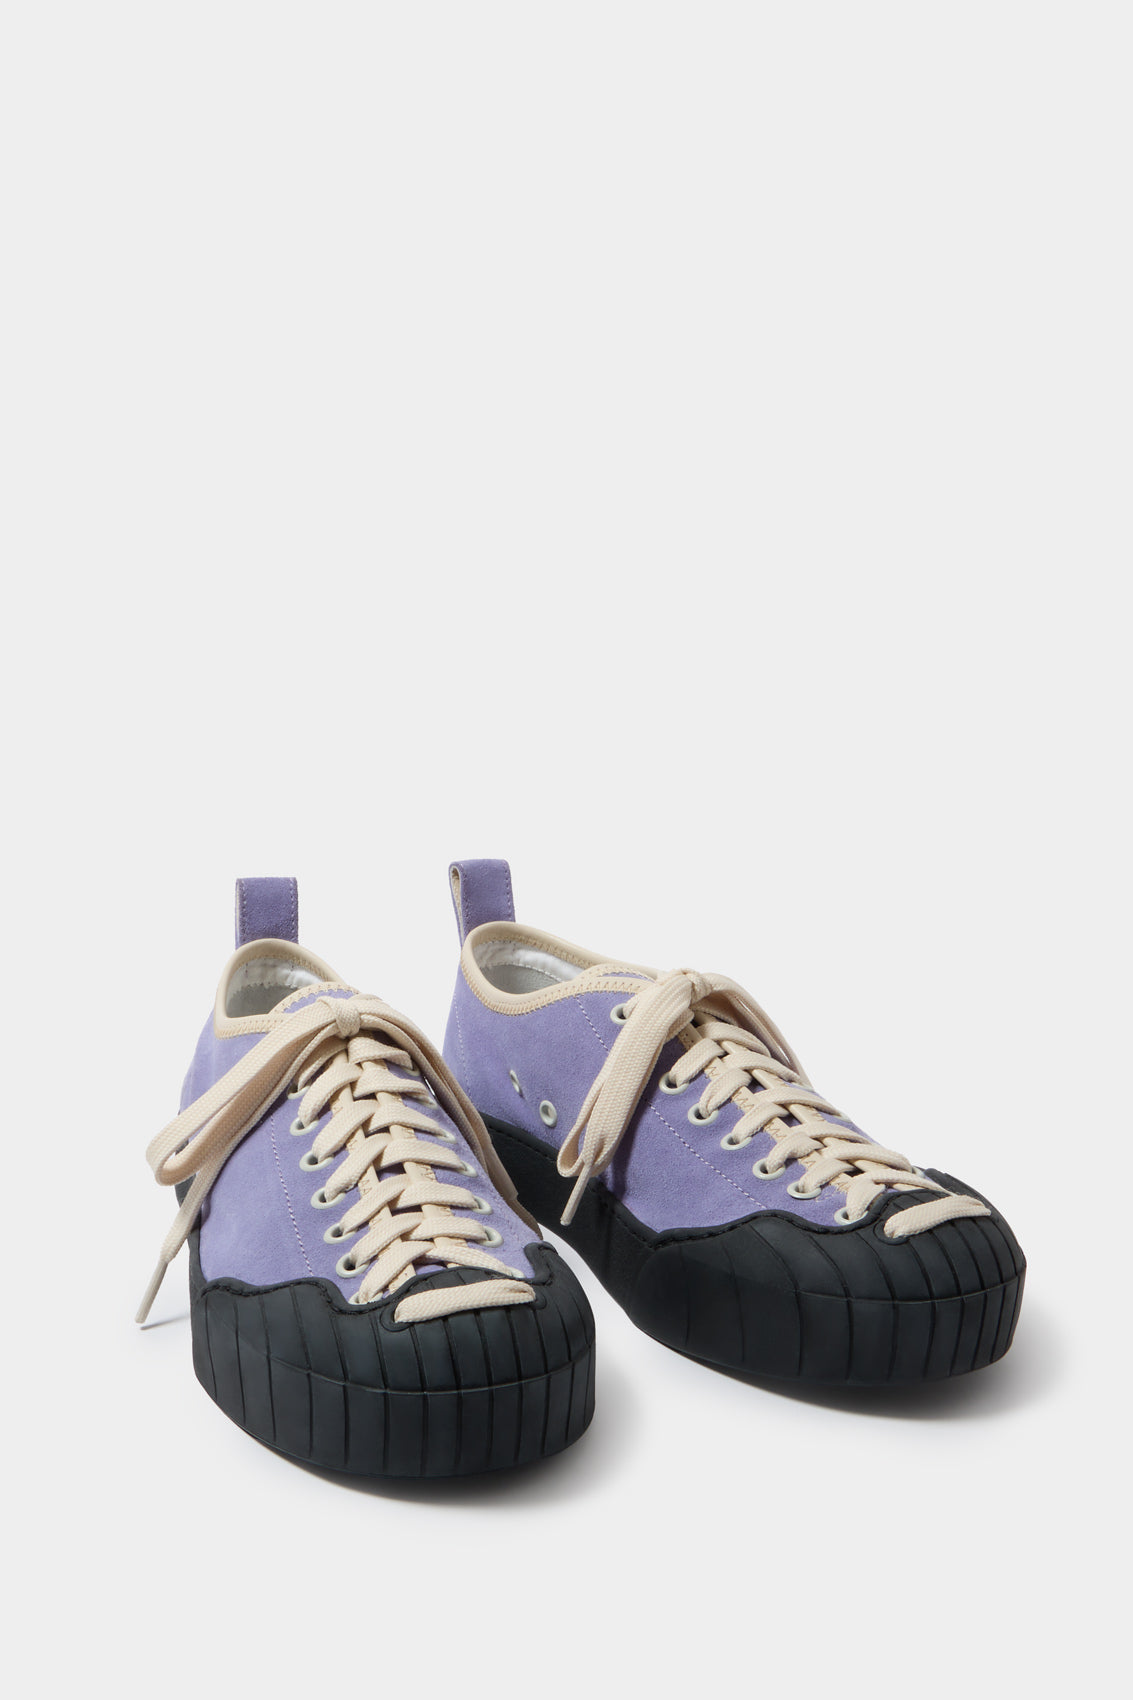 ISI LOW SHOES / periwinkle blue